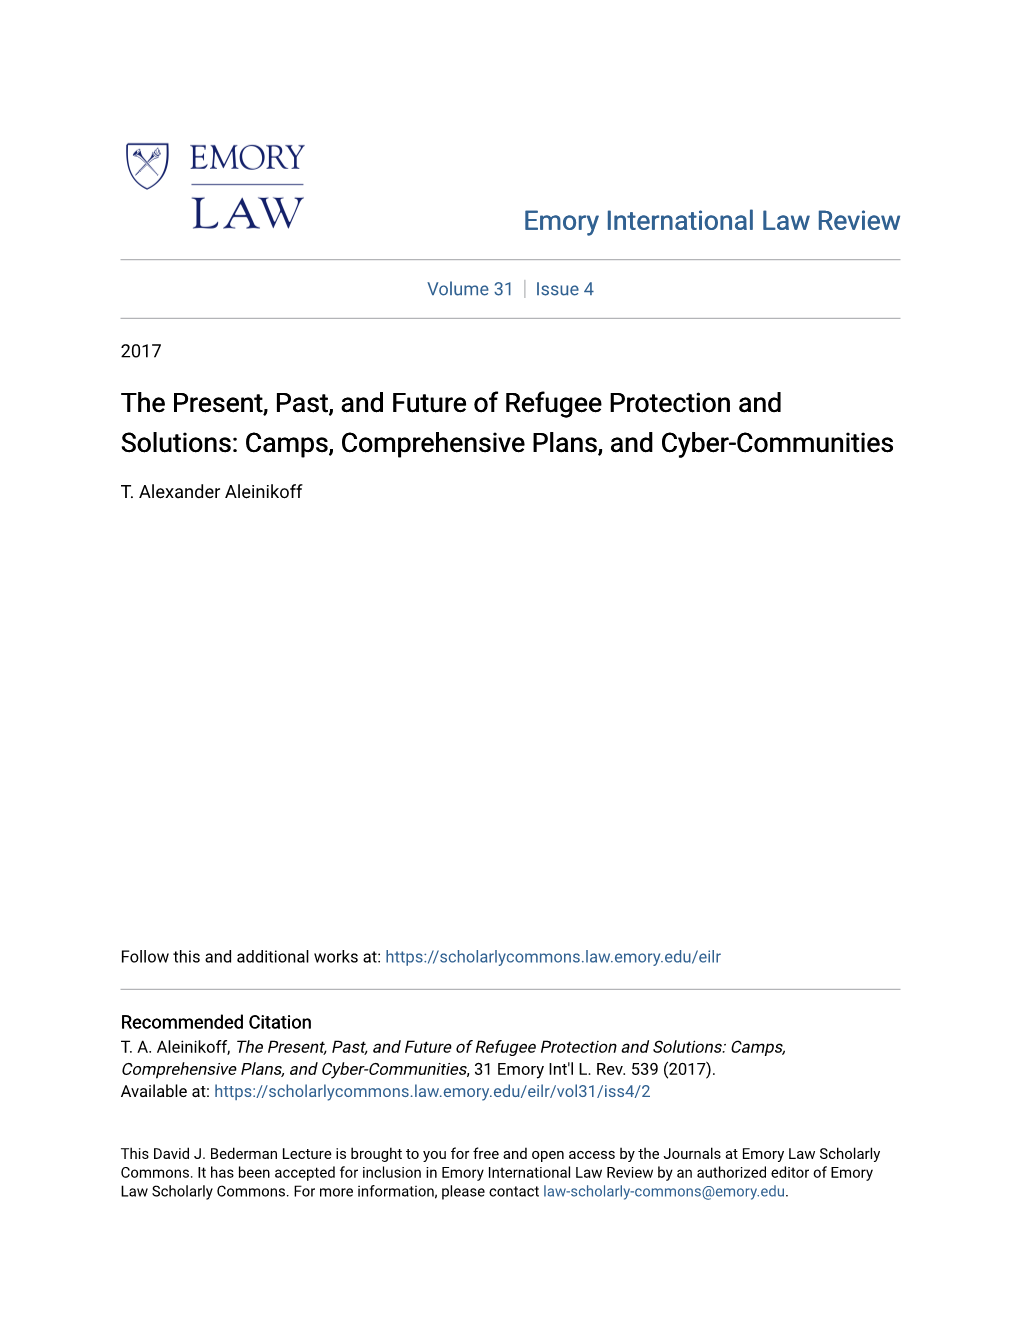 The Present, Past, and Future of Refugee Protection and Solutions: Camps, Comprehensive Plans, and Cyber-Communities